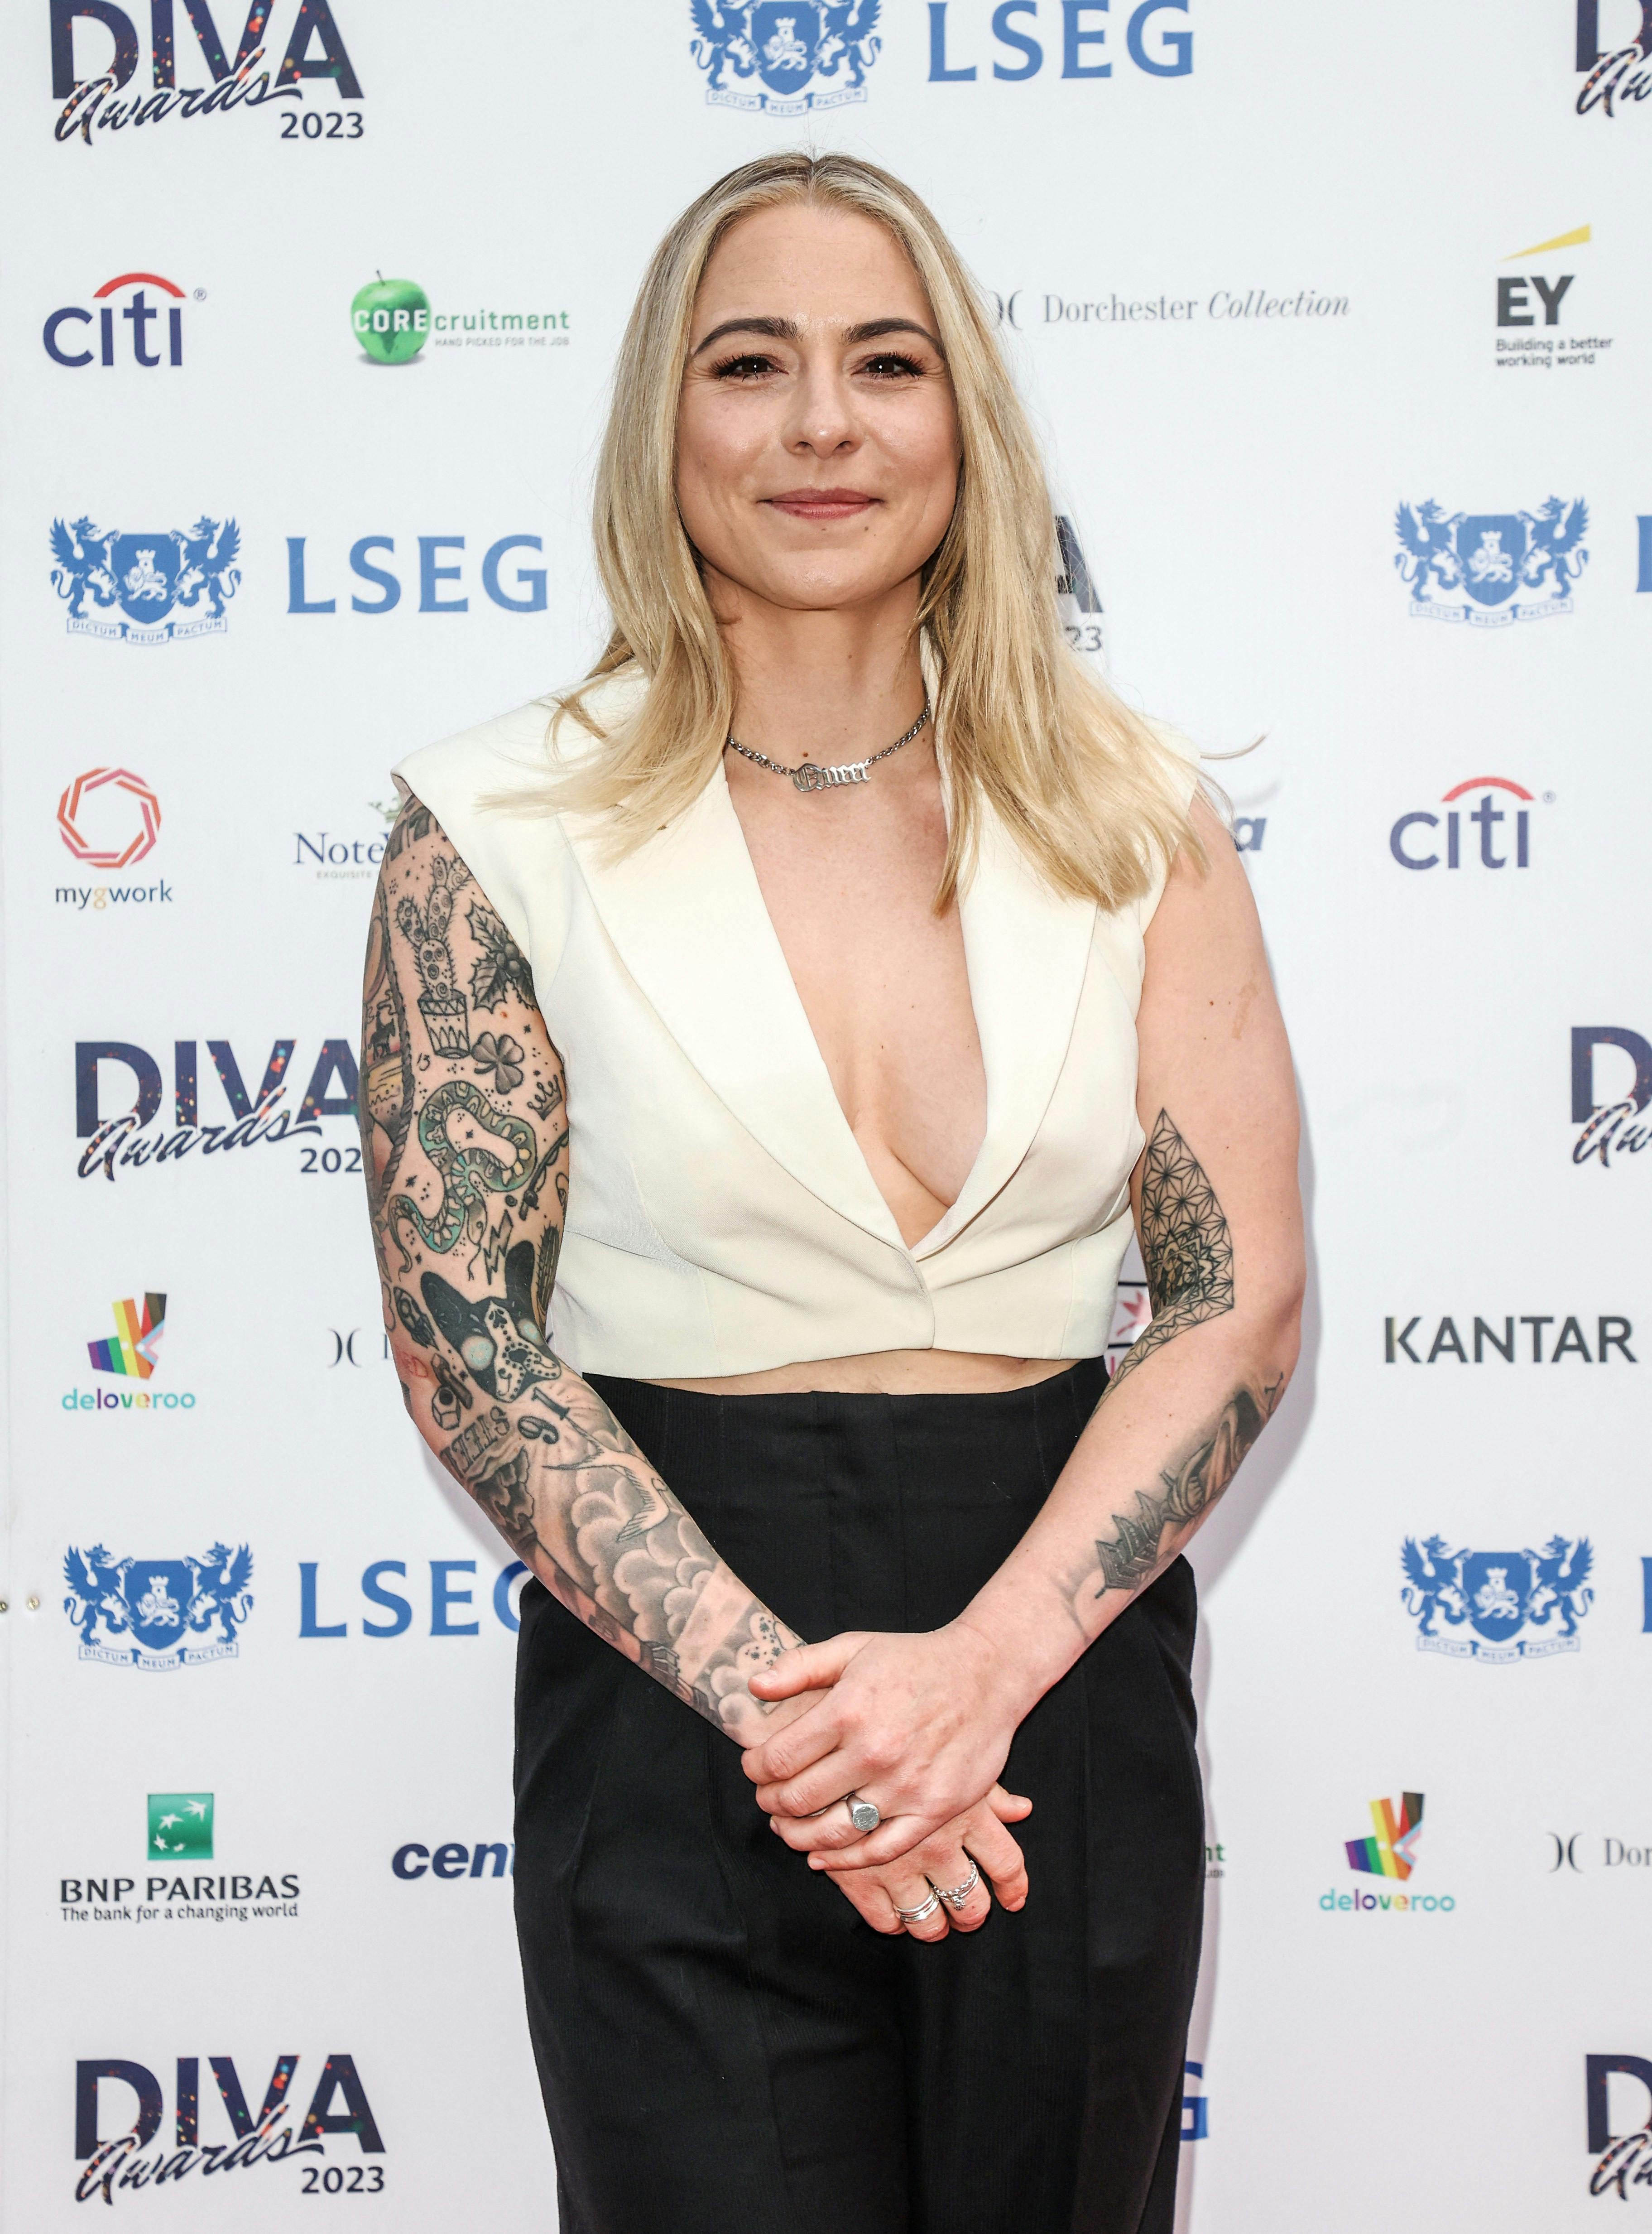 Celebrities seen attending the Diva Awards 2023 at 8 Northumberland Avenue in London. 28 Apr 2023 Pictured: Lucy Spraggan. Photo credit: MEGA TheMegaAgency.com +1 888 505 6342 (Mega Agency TagID: MEGA974451_033.jpg) [Photo via Mega Agency]